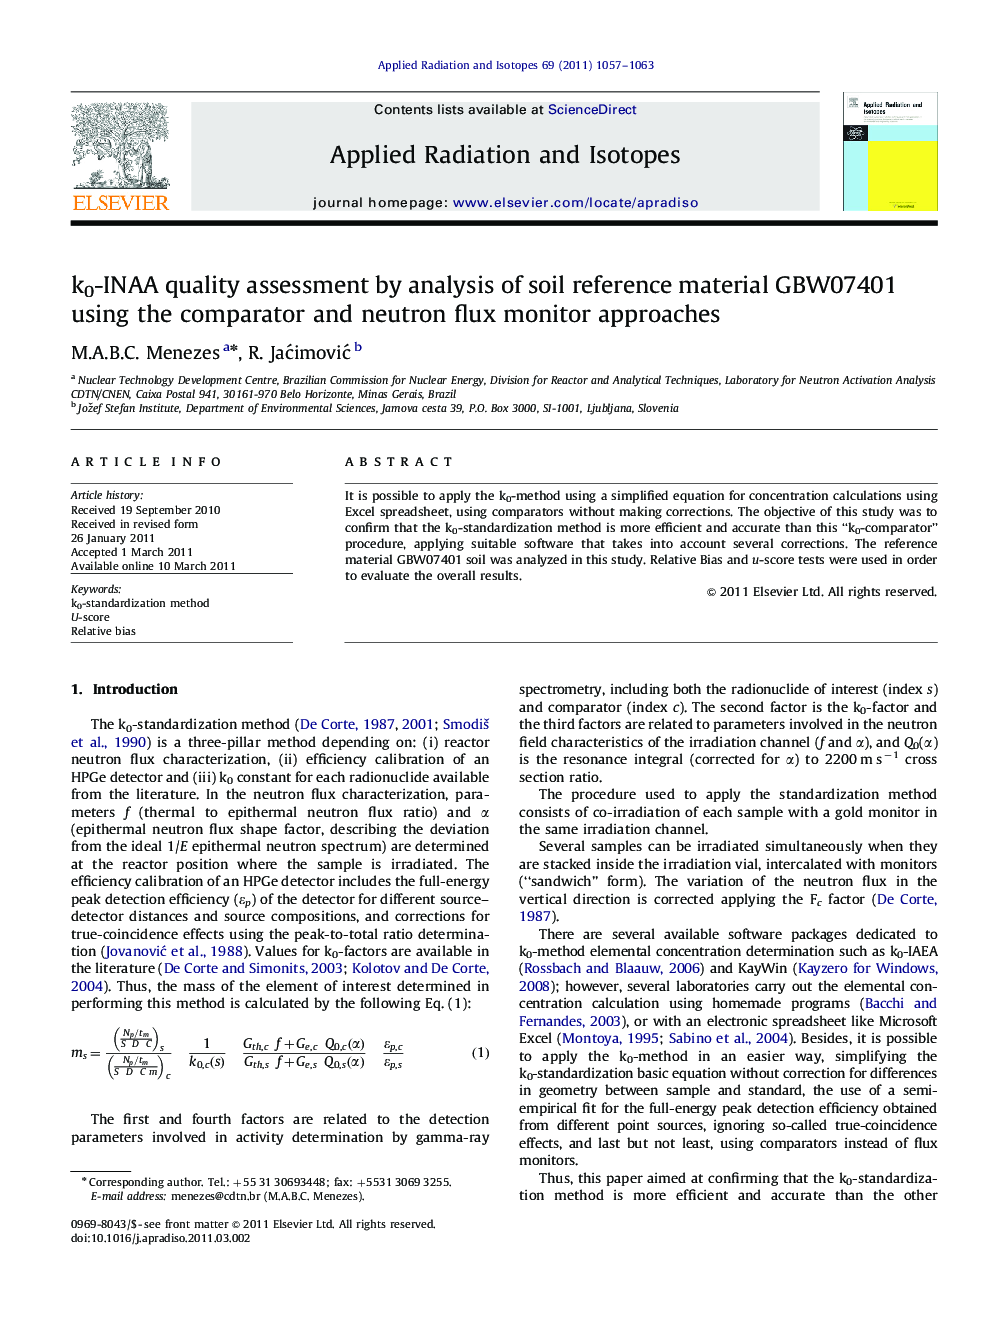 k0-INAA quality assessment by analysis of soil reference material GBW07401 using the comparator and neutron flux monitor approaches